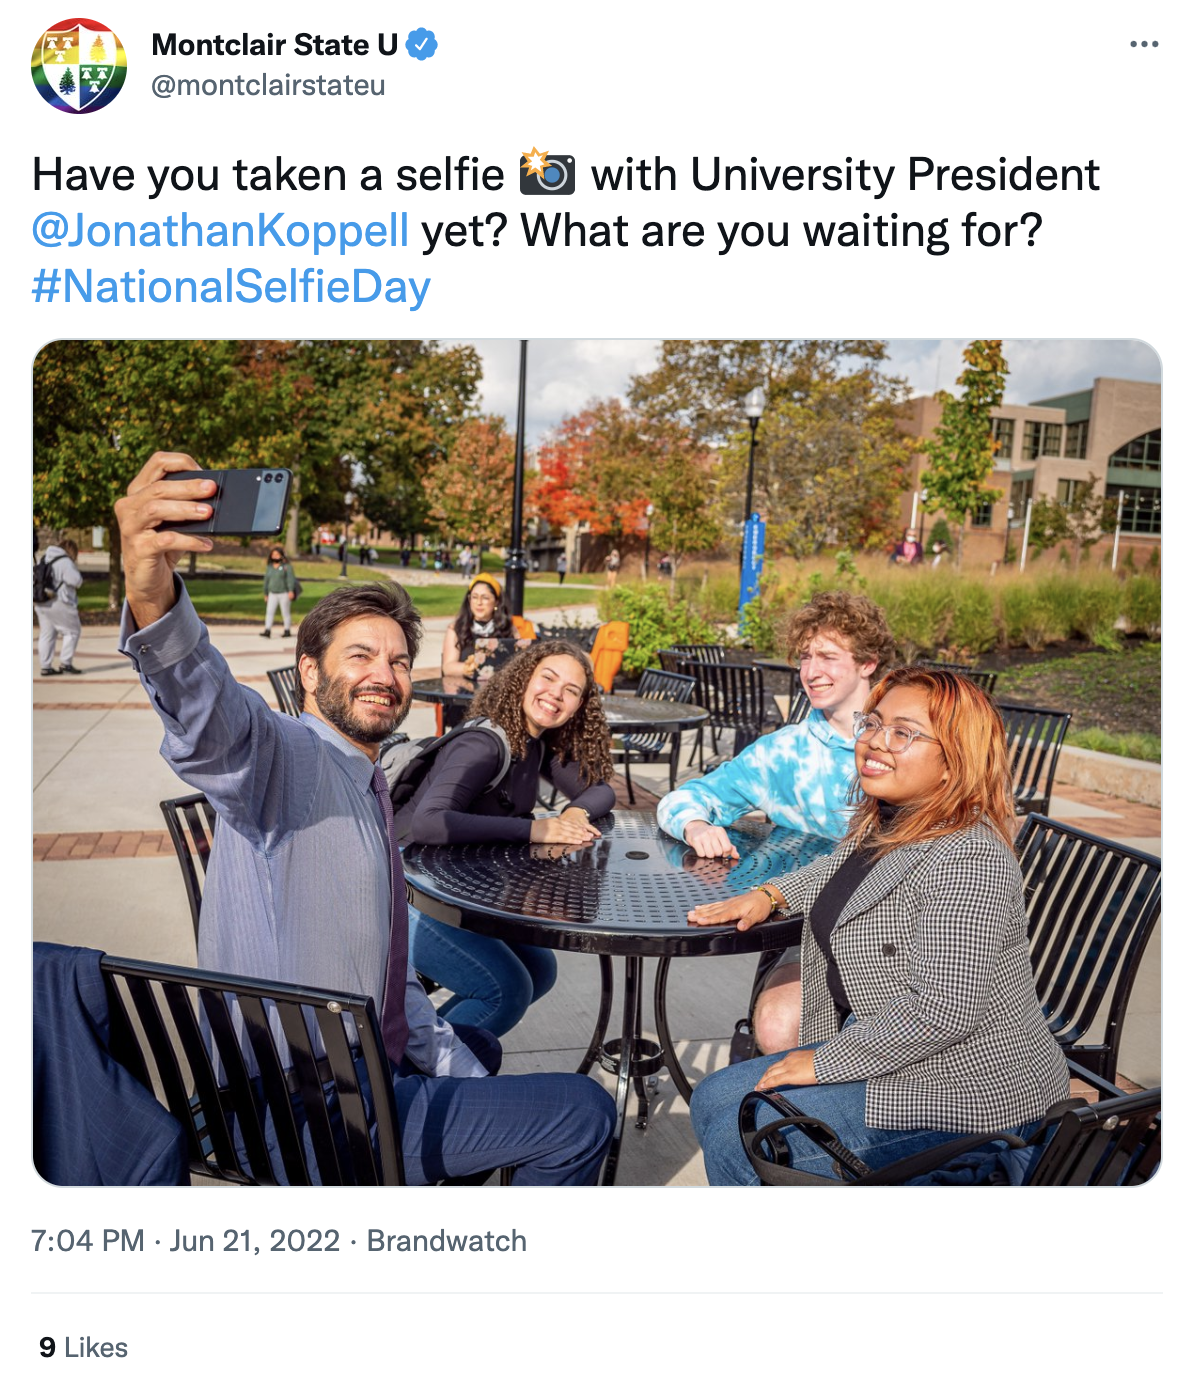 @montclairstateu: Have you taken a selfie 📸 with University President  @JonathanKoppell  yet? What are you waiting for? #NationalSelfieDay